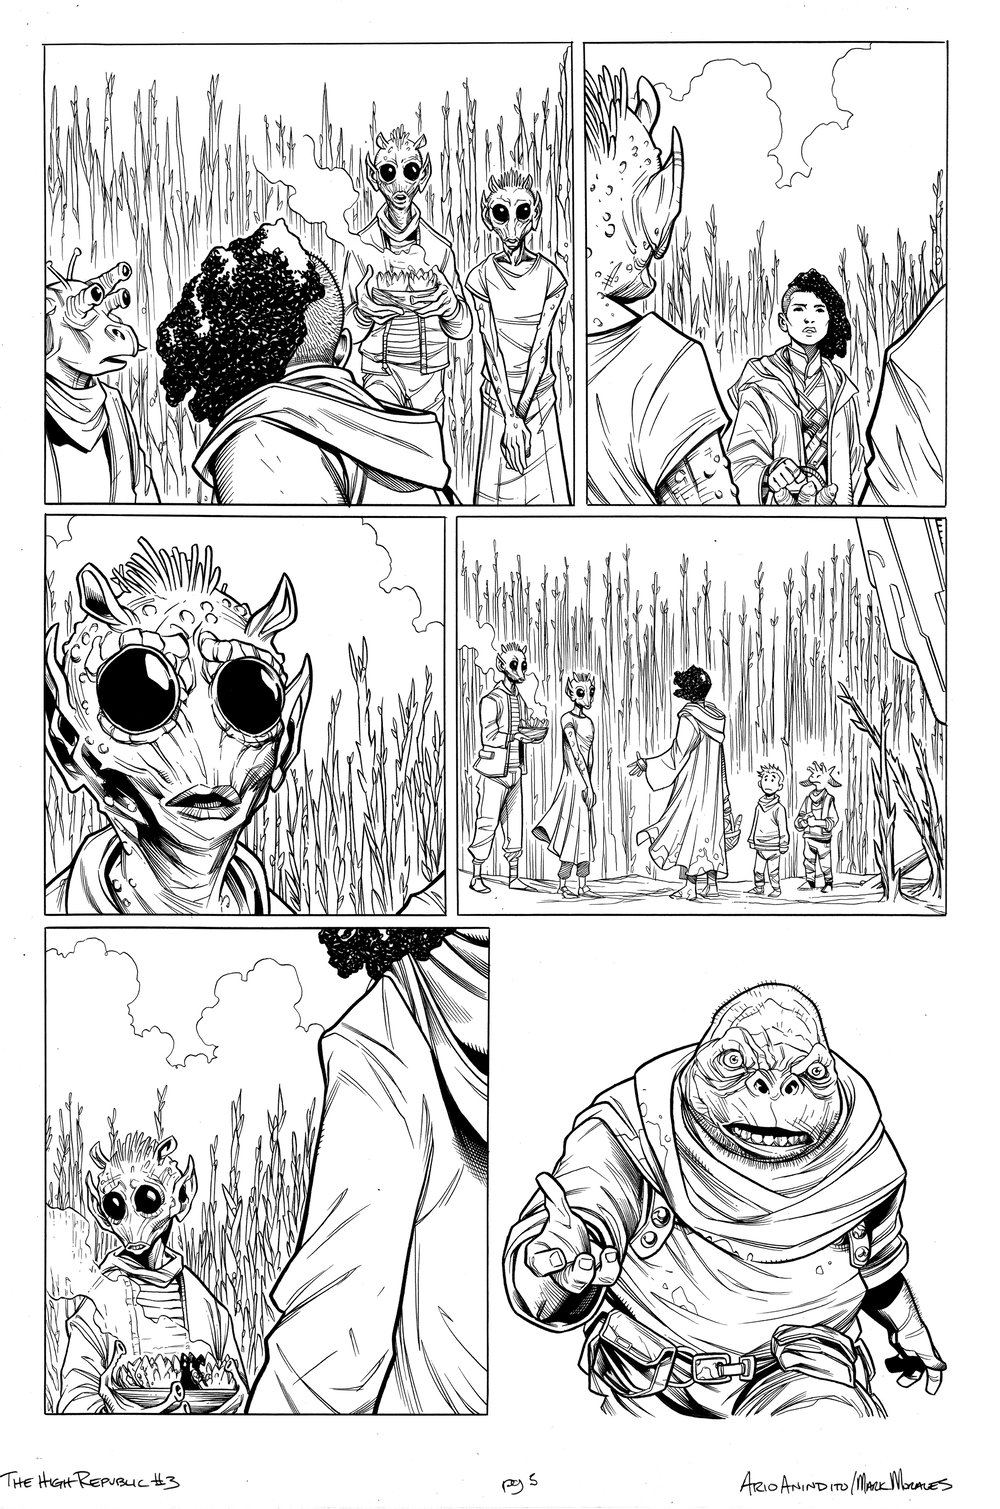 Image of Star Wars: The High Republic #3 PG 3